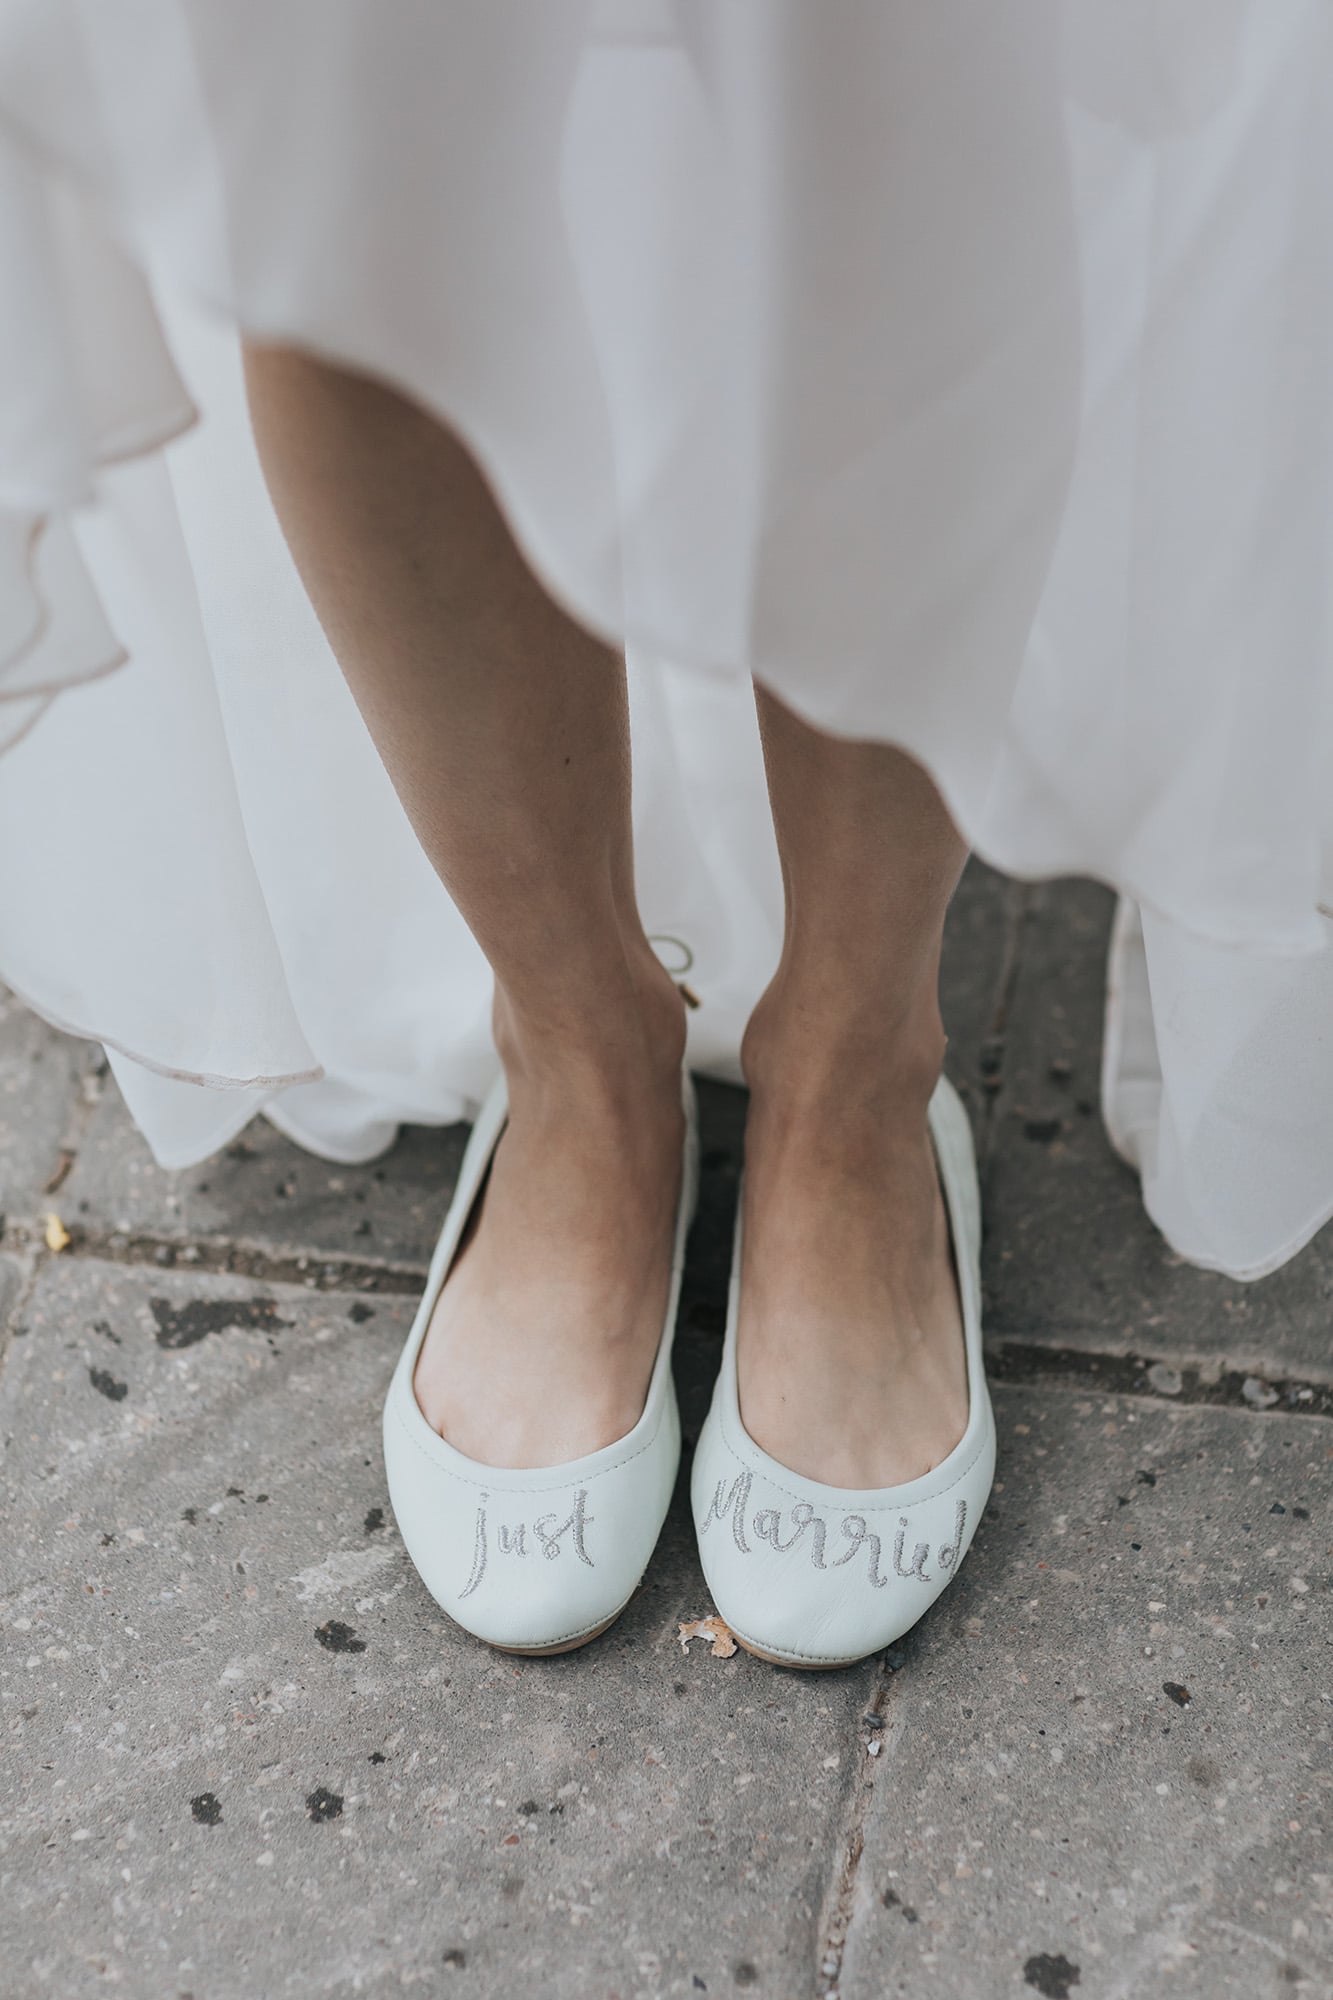 Lake Louise Summer Elopement just married shoes